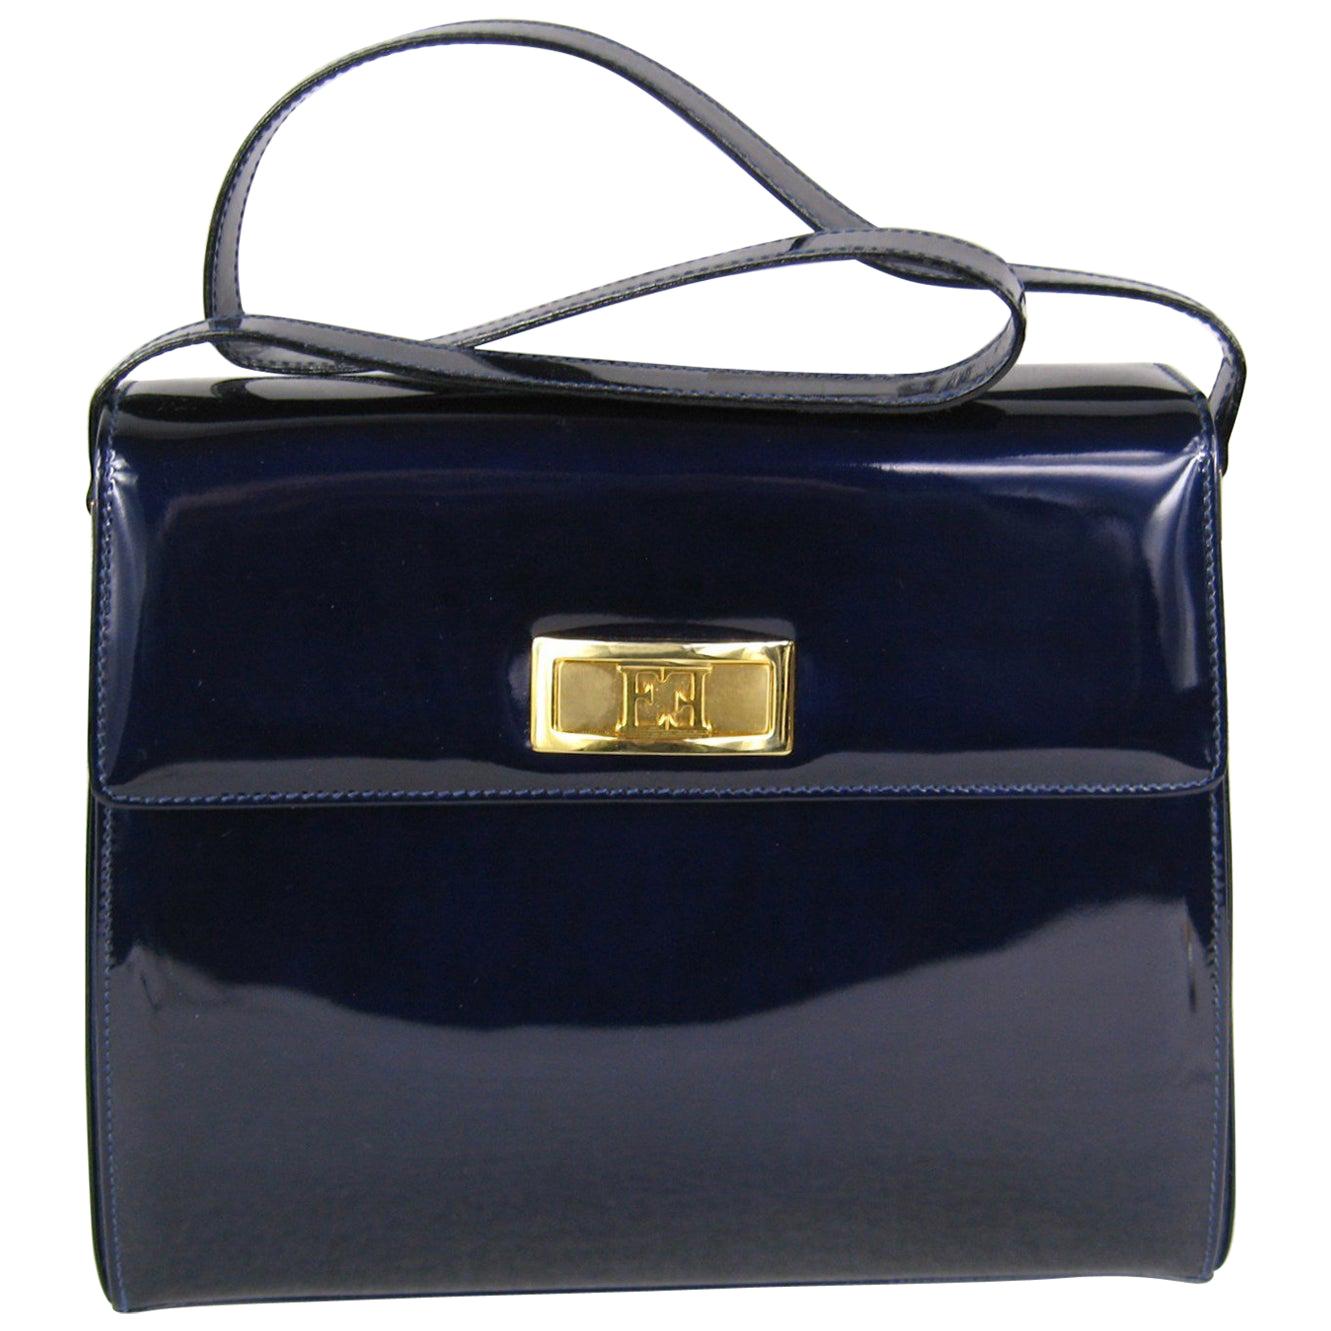 Escada Blue Patent Leather Kelly Hand Bag Never Used Tags Attached 1990s